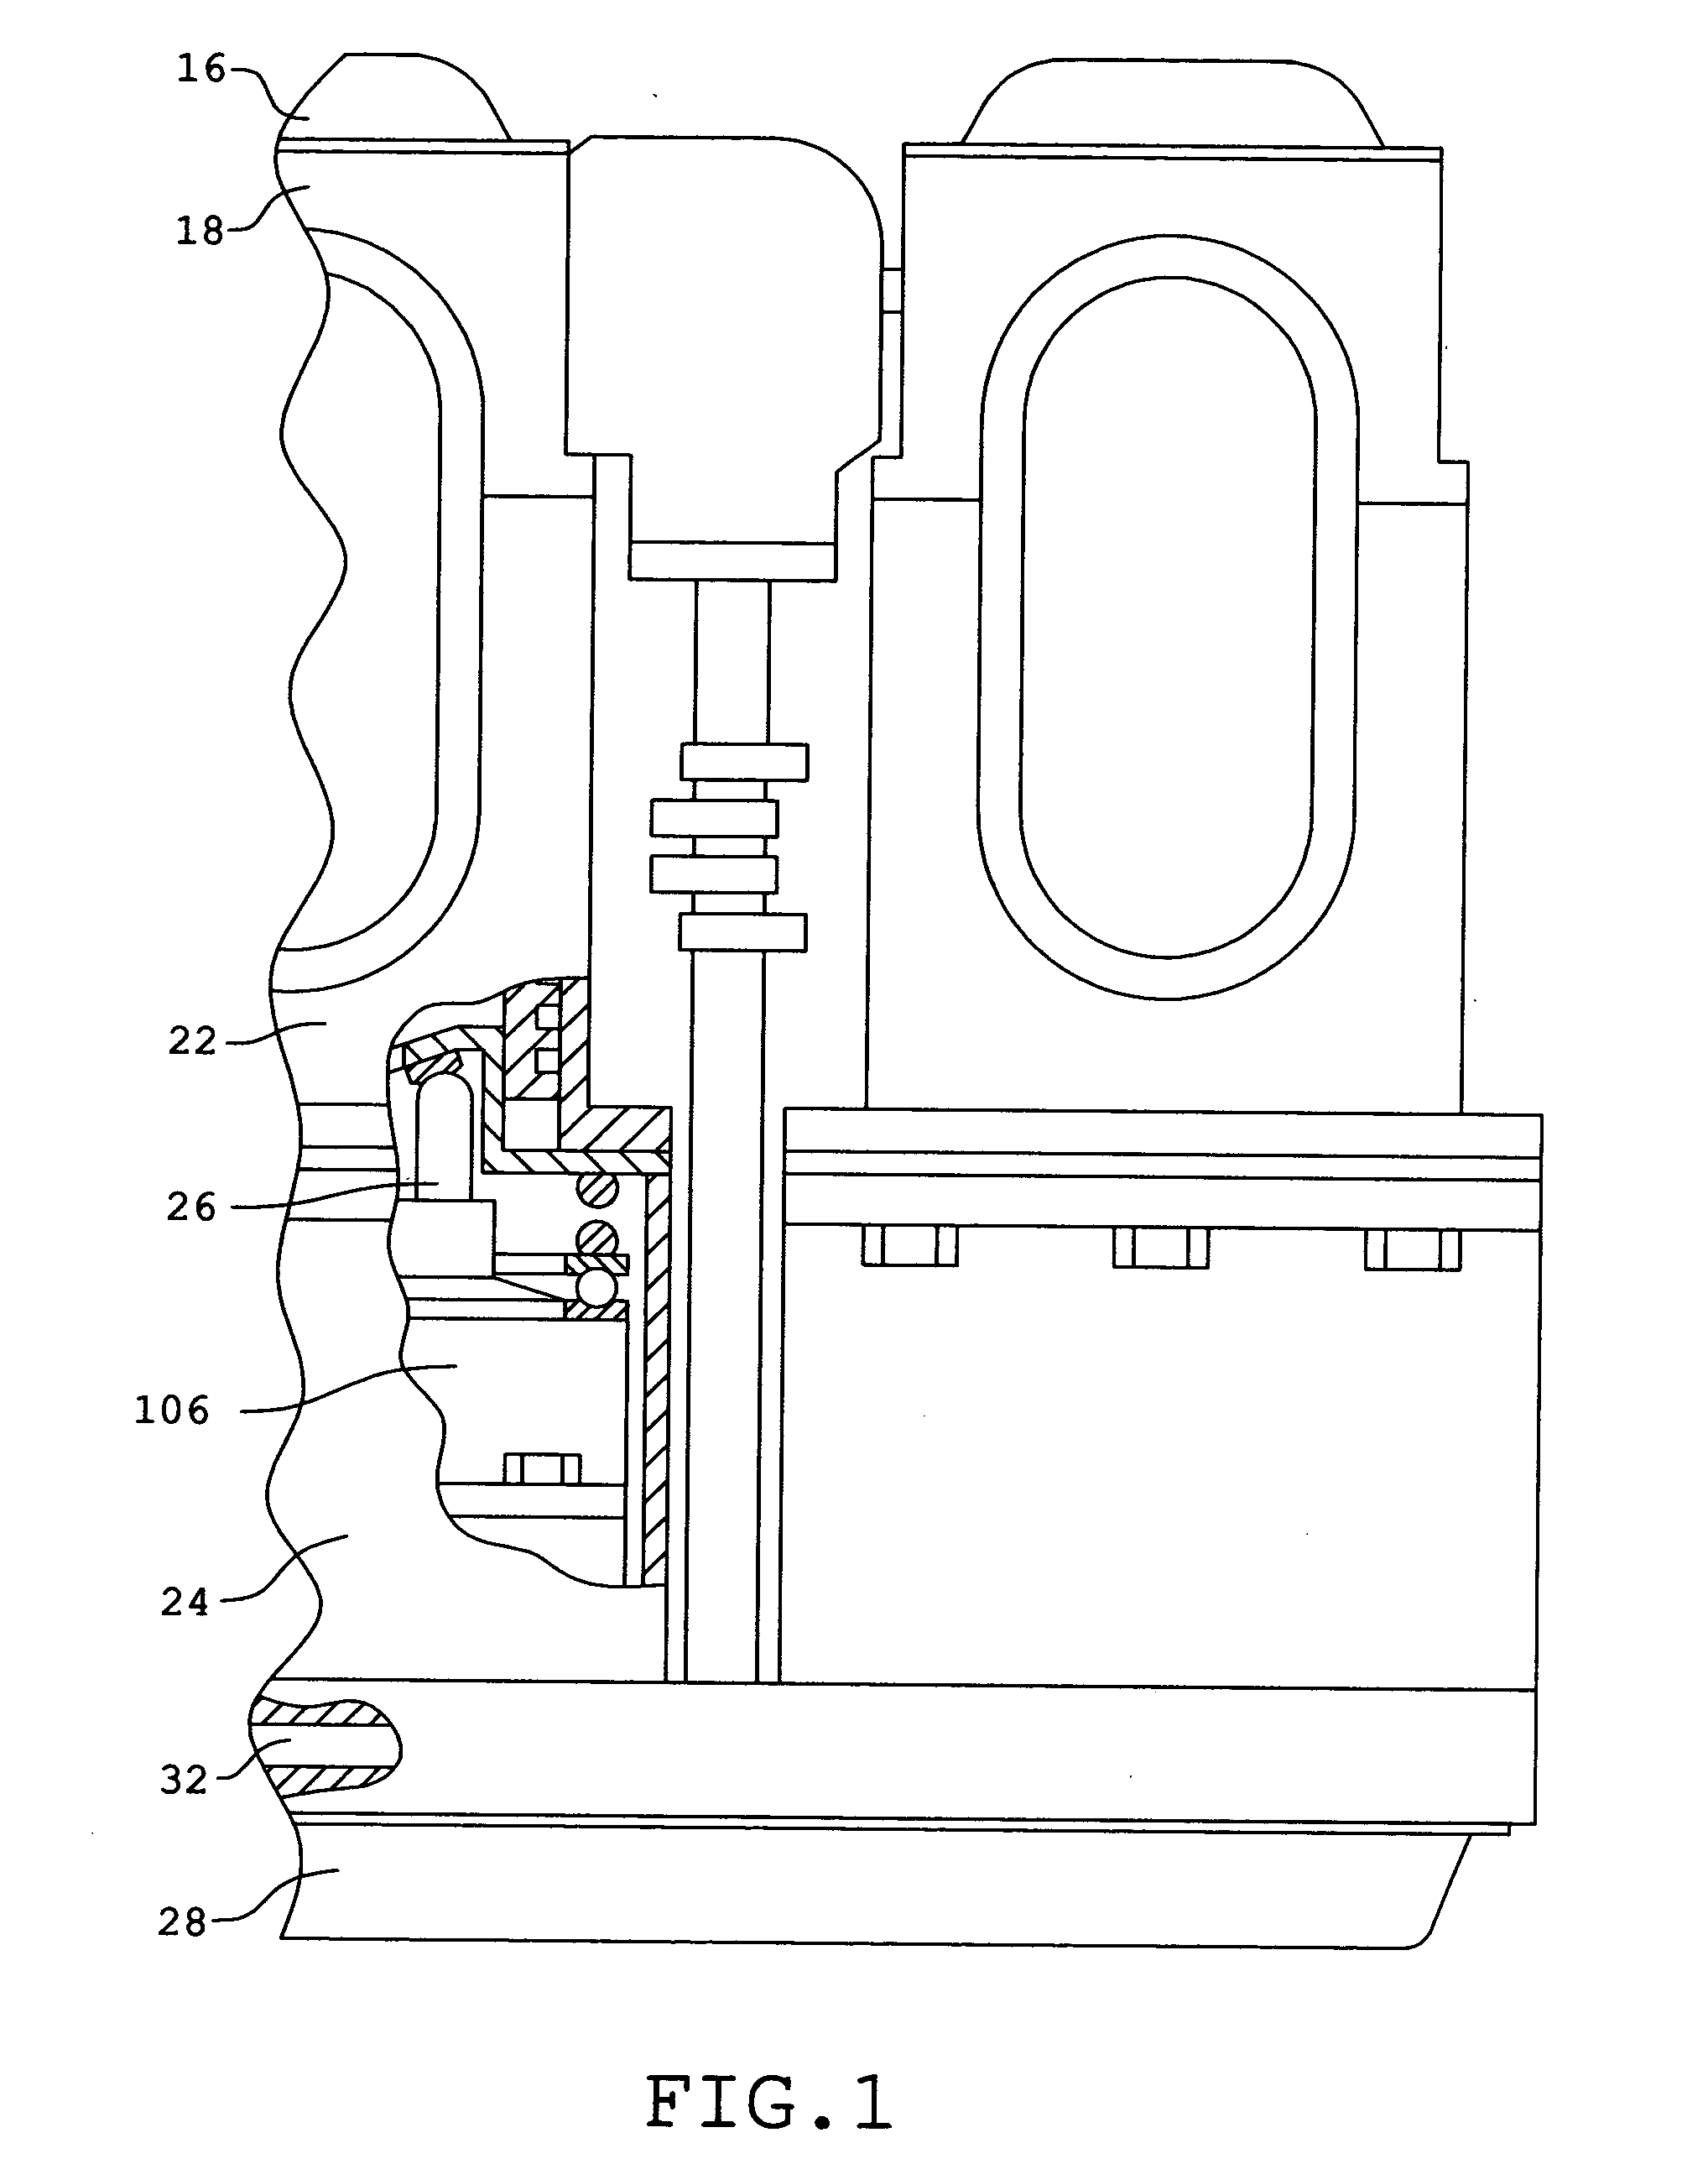 Hybrid two cycle engine, compressor and pump, and method of operation